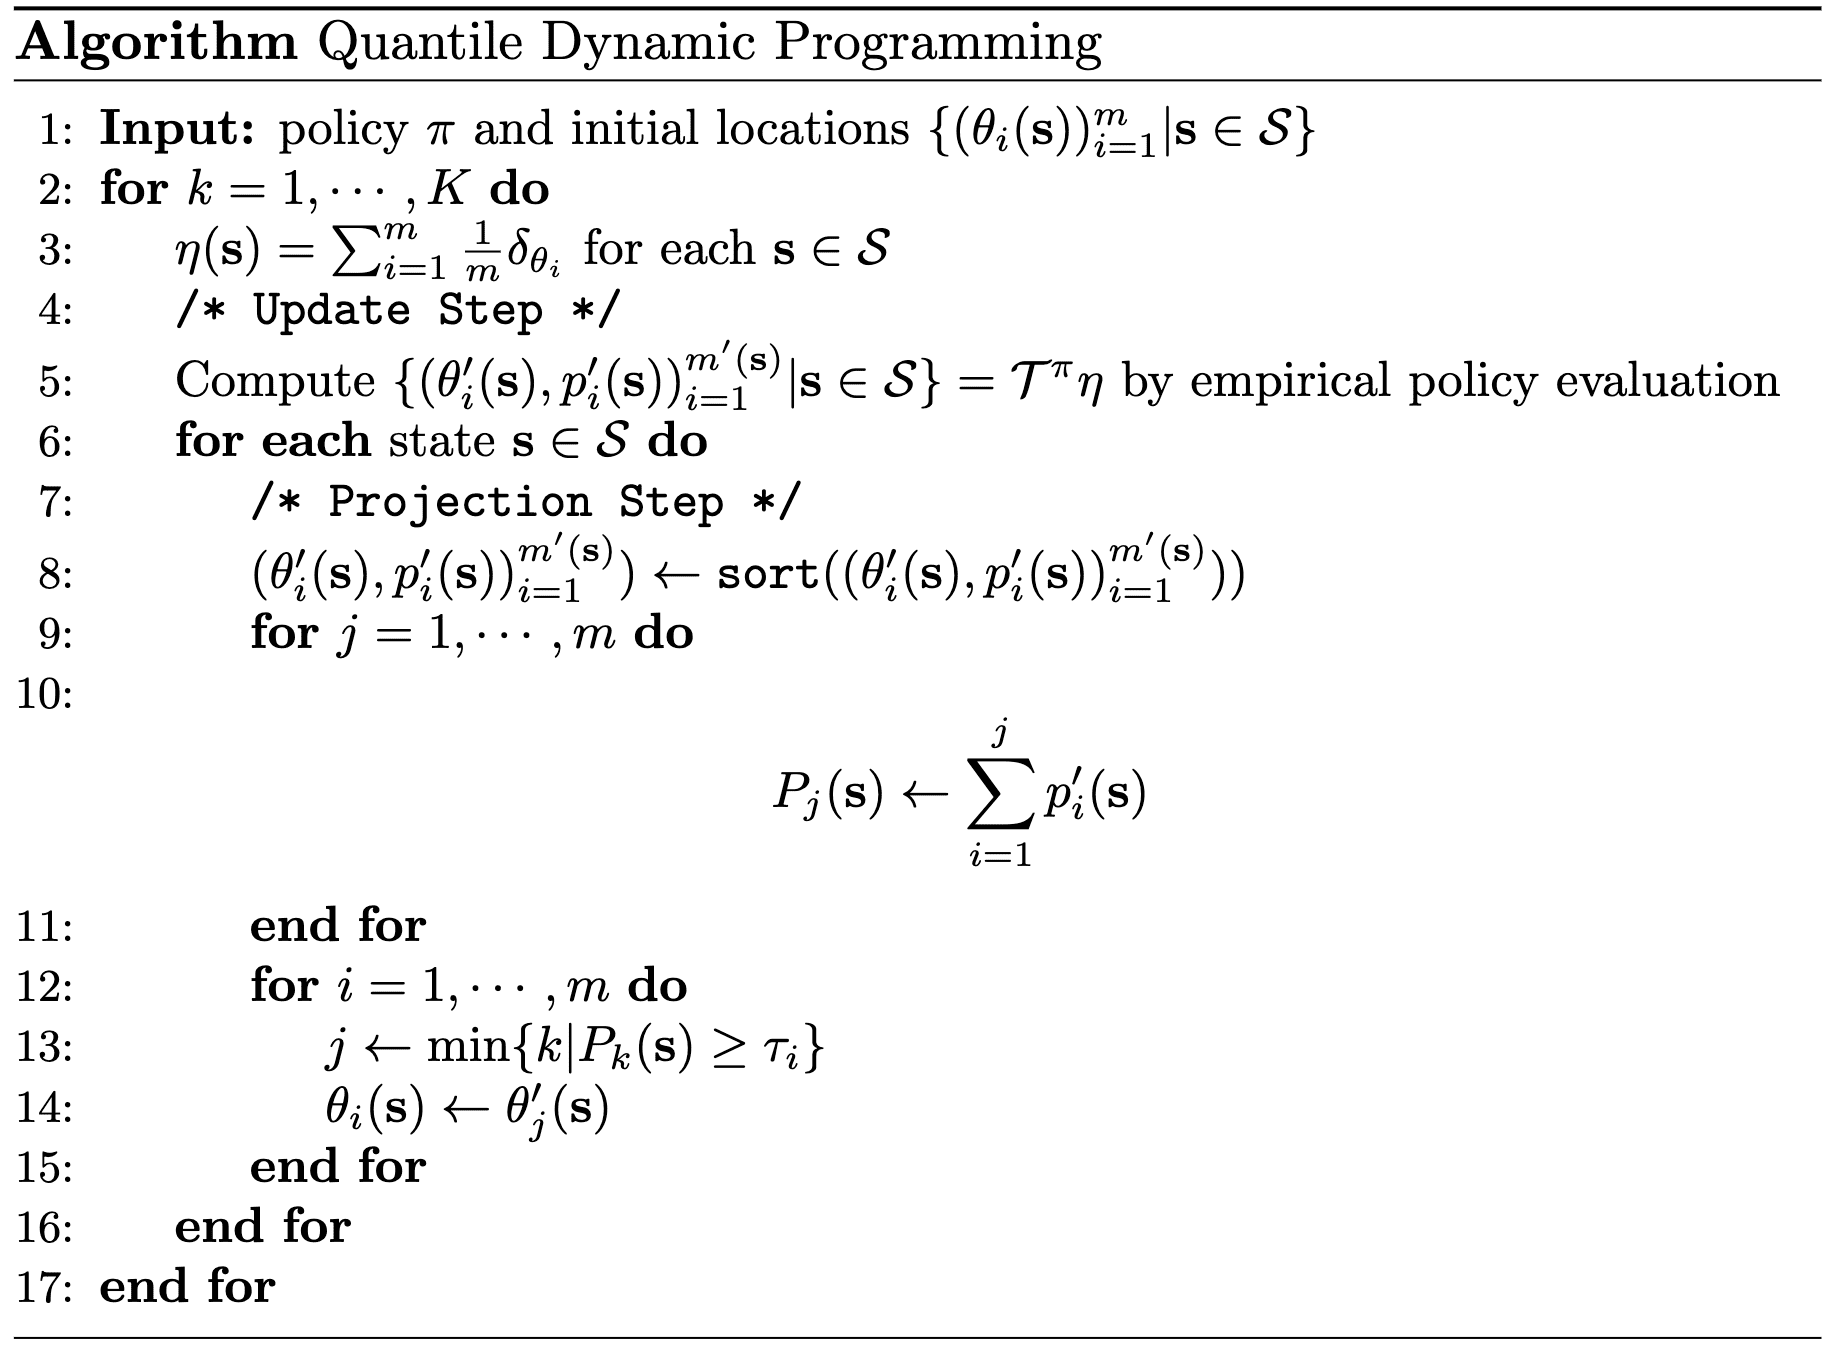 The pseudocode of Quantile Dynamic Programming